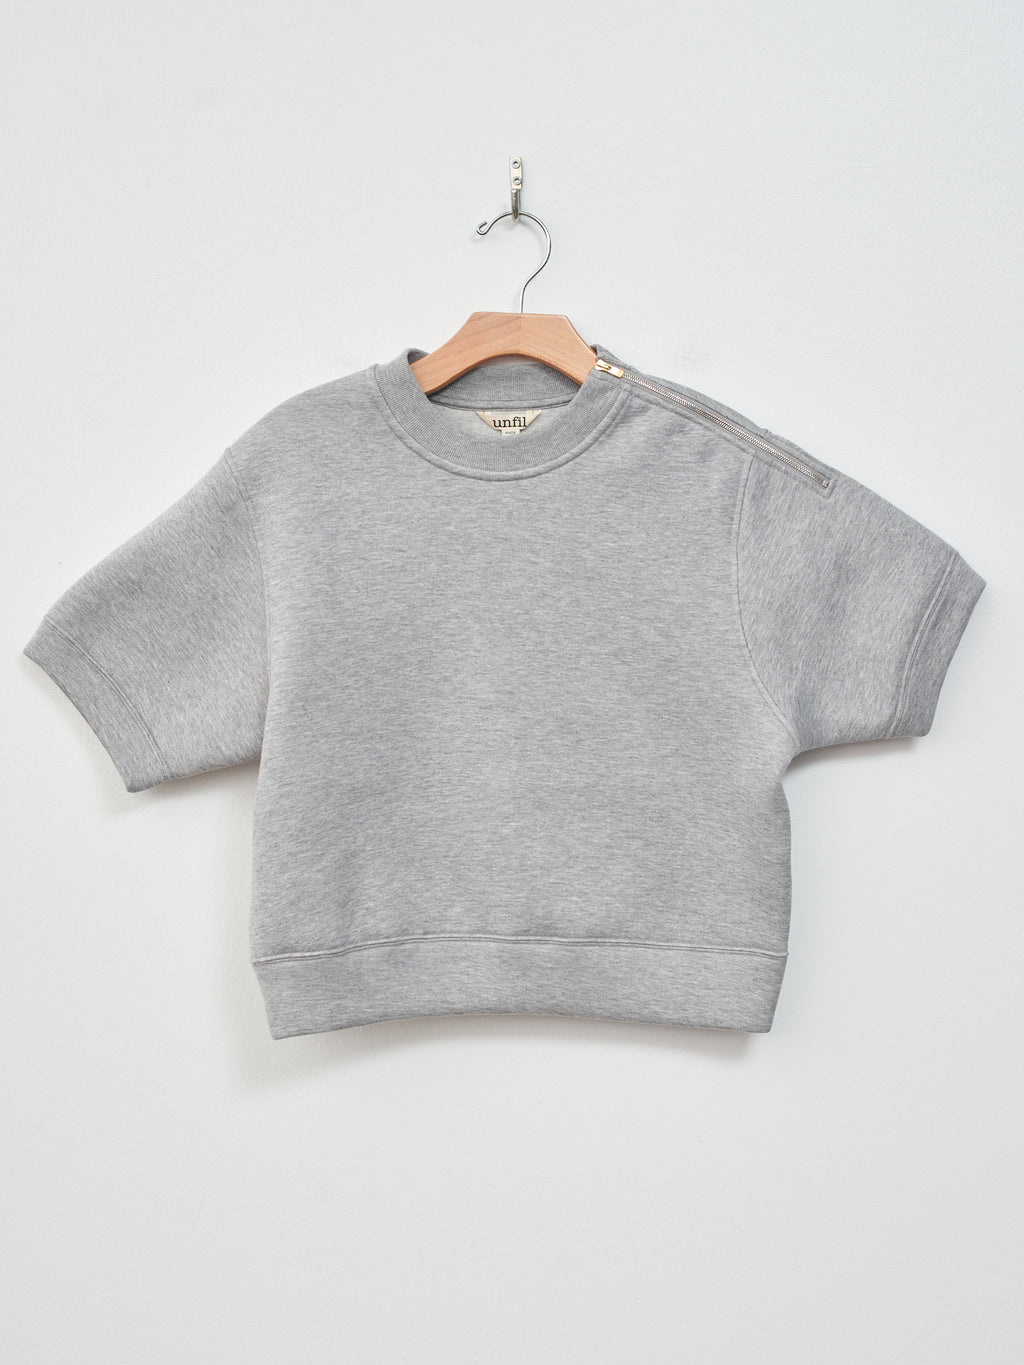 Namu Shop - Unfil Double Facing Jersey Cropped Half Sleeve Top - Heather Gray